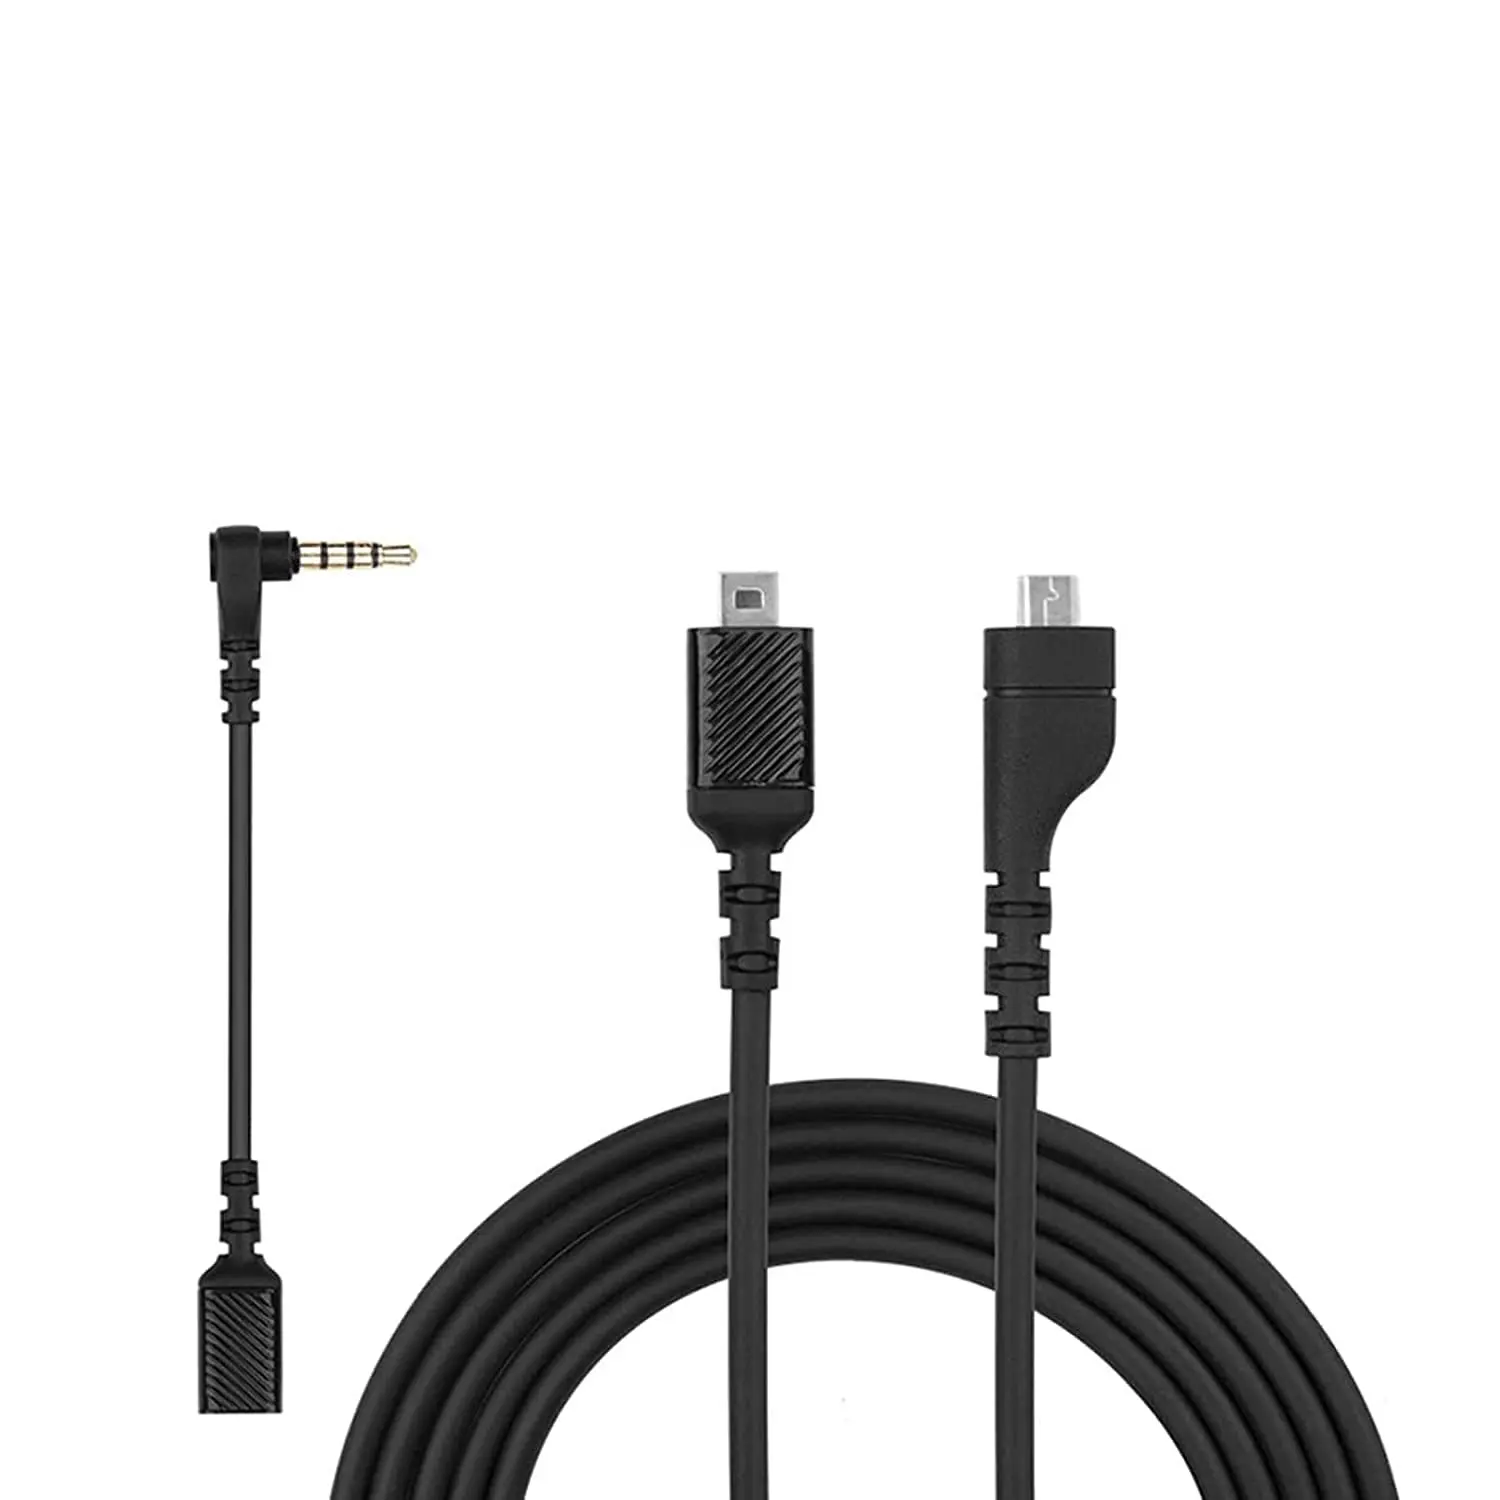 1.5m+20cm Length Audio Cable Compatible with SteelSeries Arctis 3 / Arctis 5 / Arctis 7 Gaming Headset with 3.5mm Adapter Cable